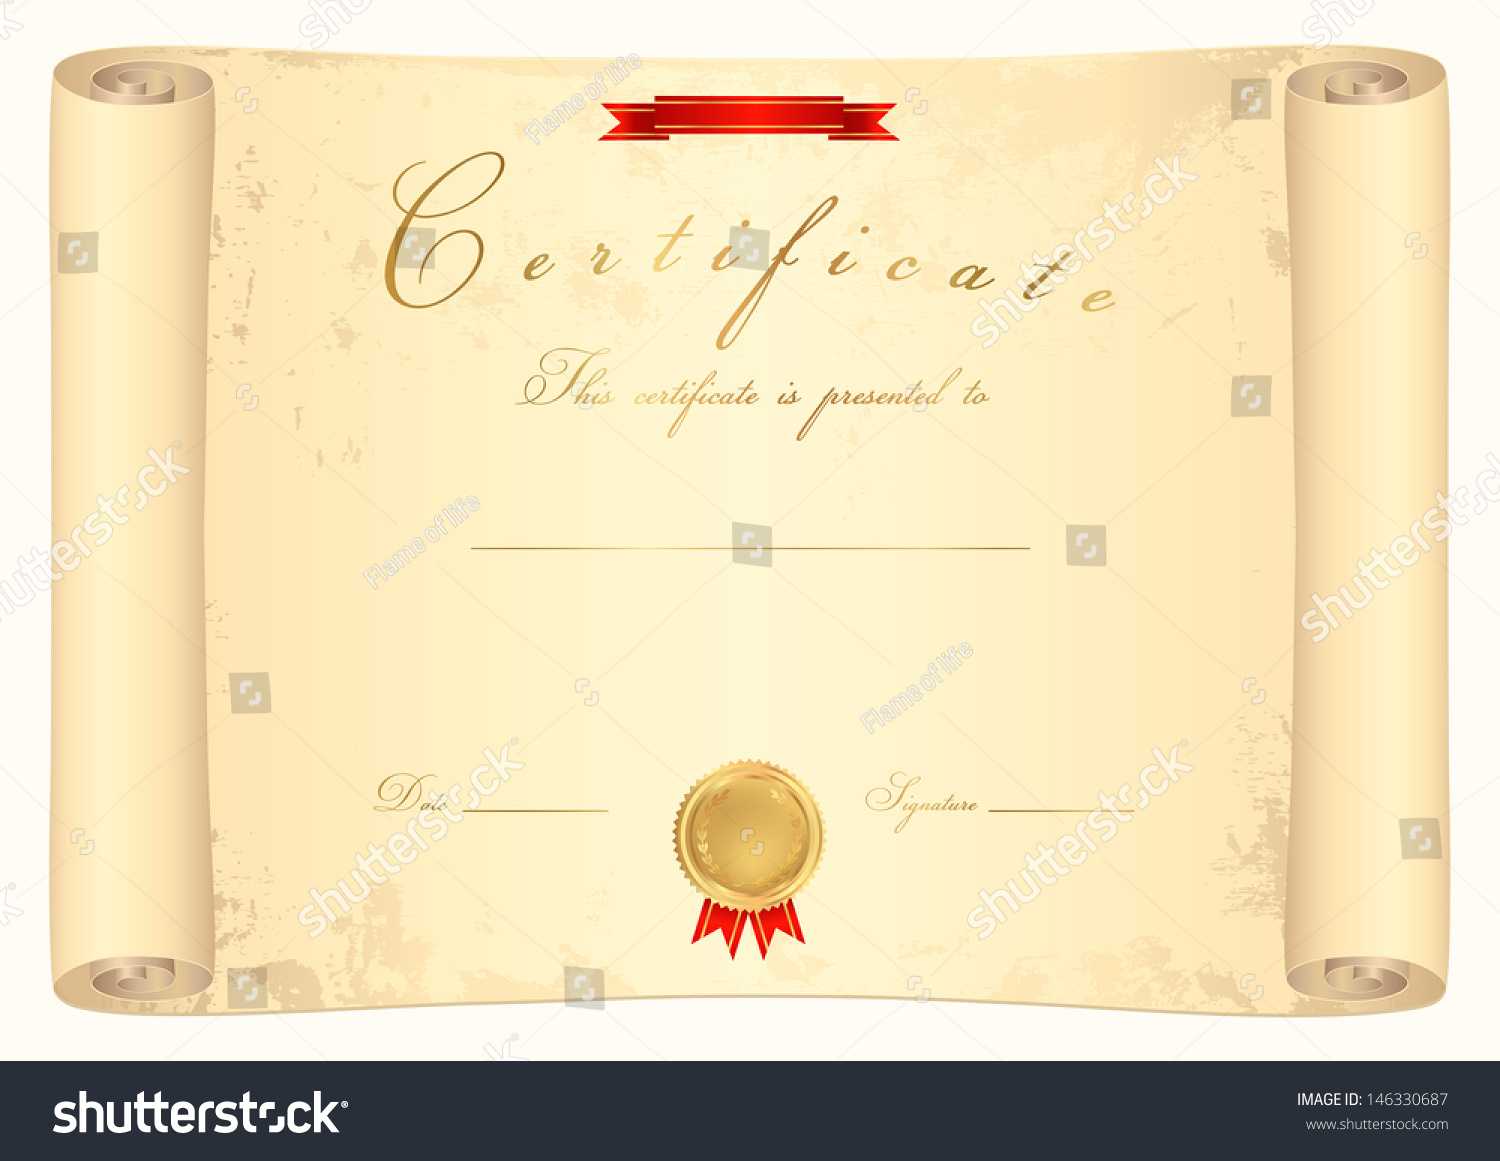 Scroll Certificate Completion Template Sample Background In Certificate Scroll Template